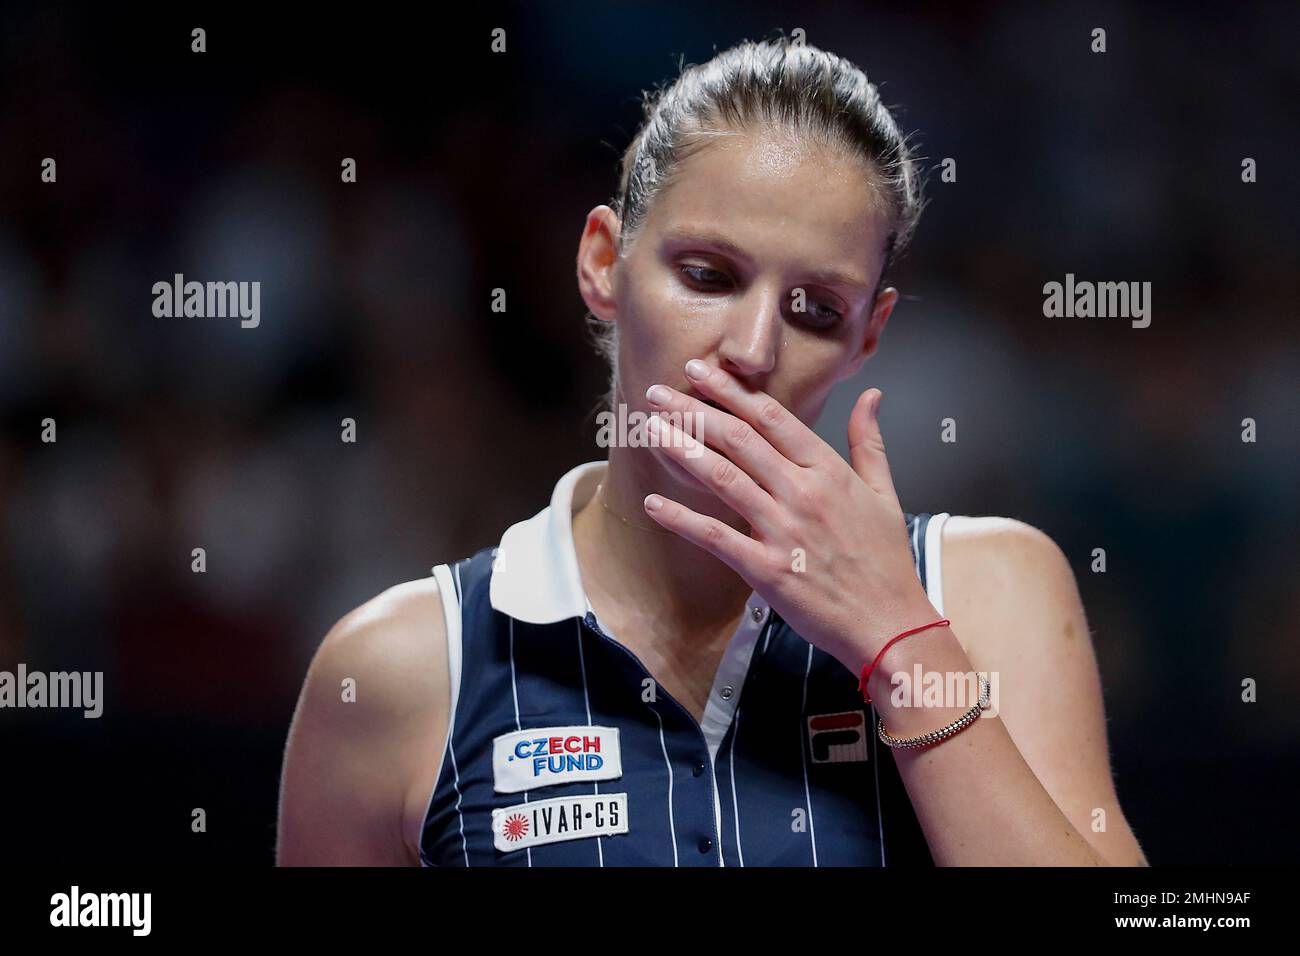 Karolina Pliskova of the Czech Republic reacts as she plays against Ashleigh Barty of Australia during the WTA Finals Tennis Tournament at the Shenzhen Bay Sports Center in Shenzhen, Chinas Guangdong province,